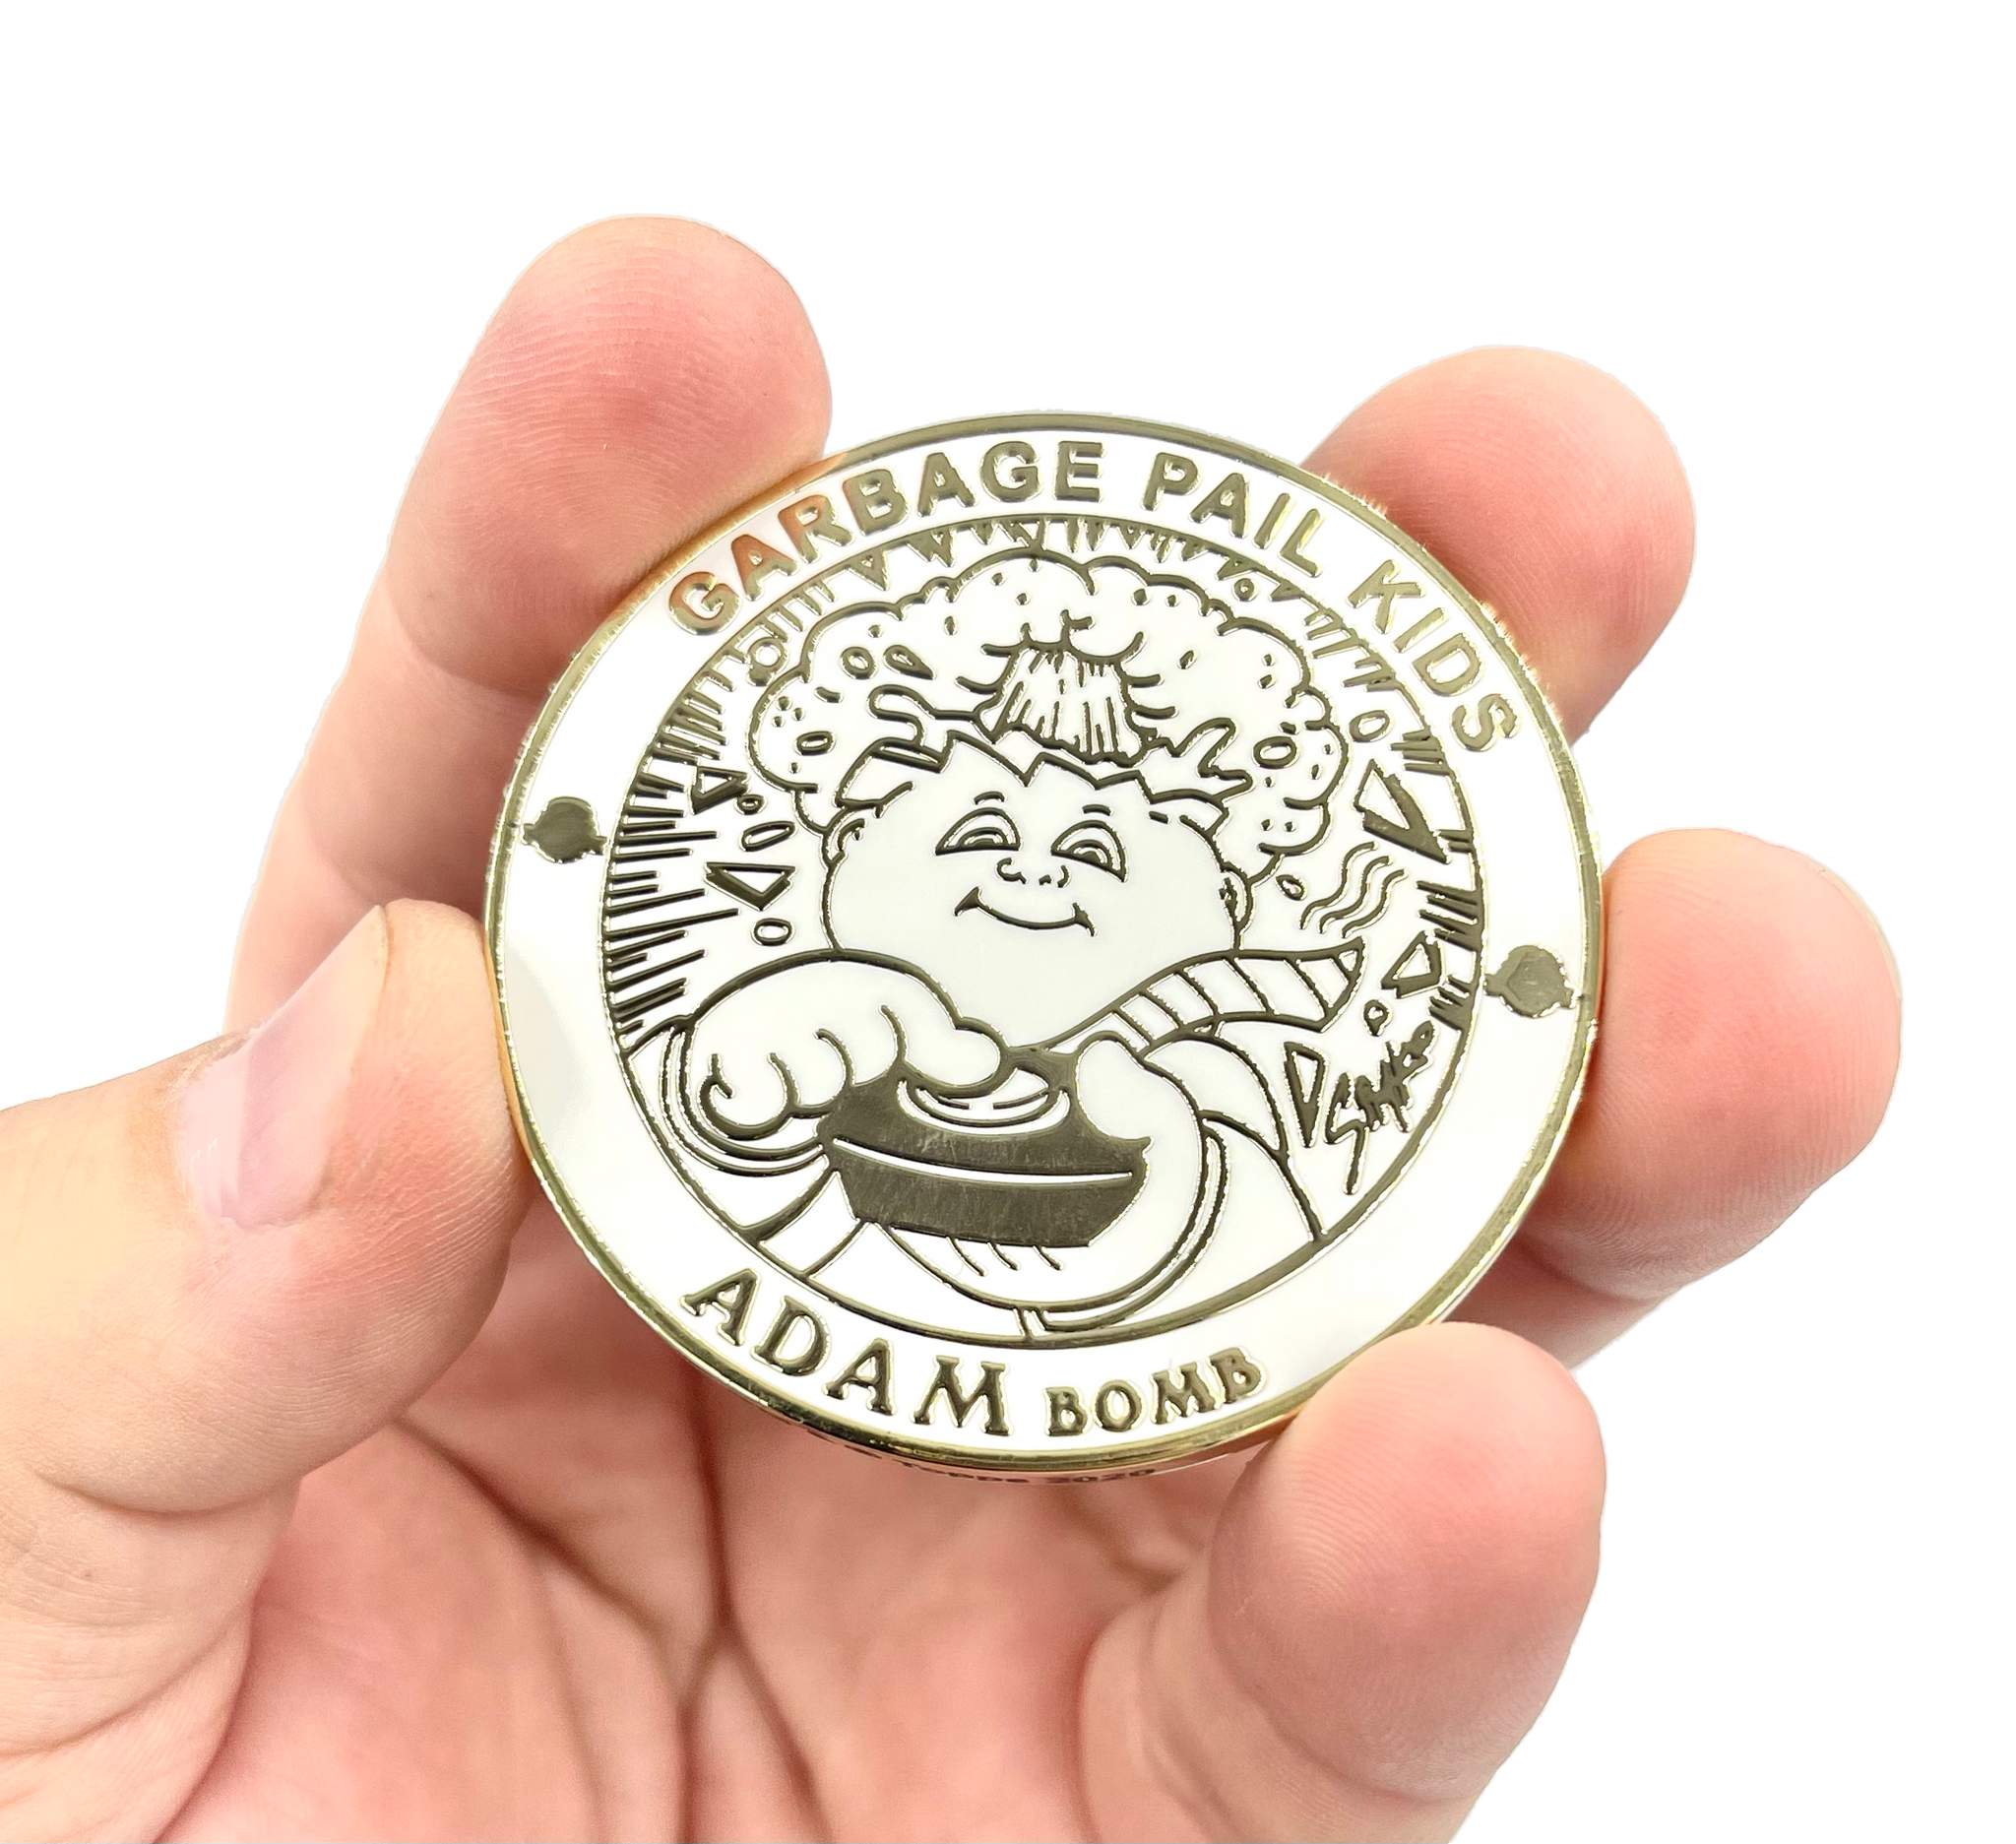 GPK-FL-01-G ADAM BOMB Challenge Coin Officially Licensed GPK by Topps Artist SIMKO artist collab collection Garbage Pail Kids